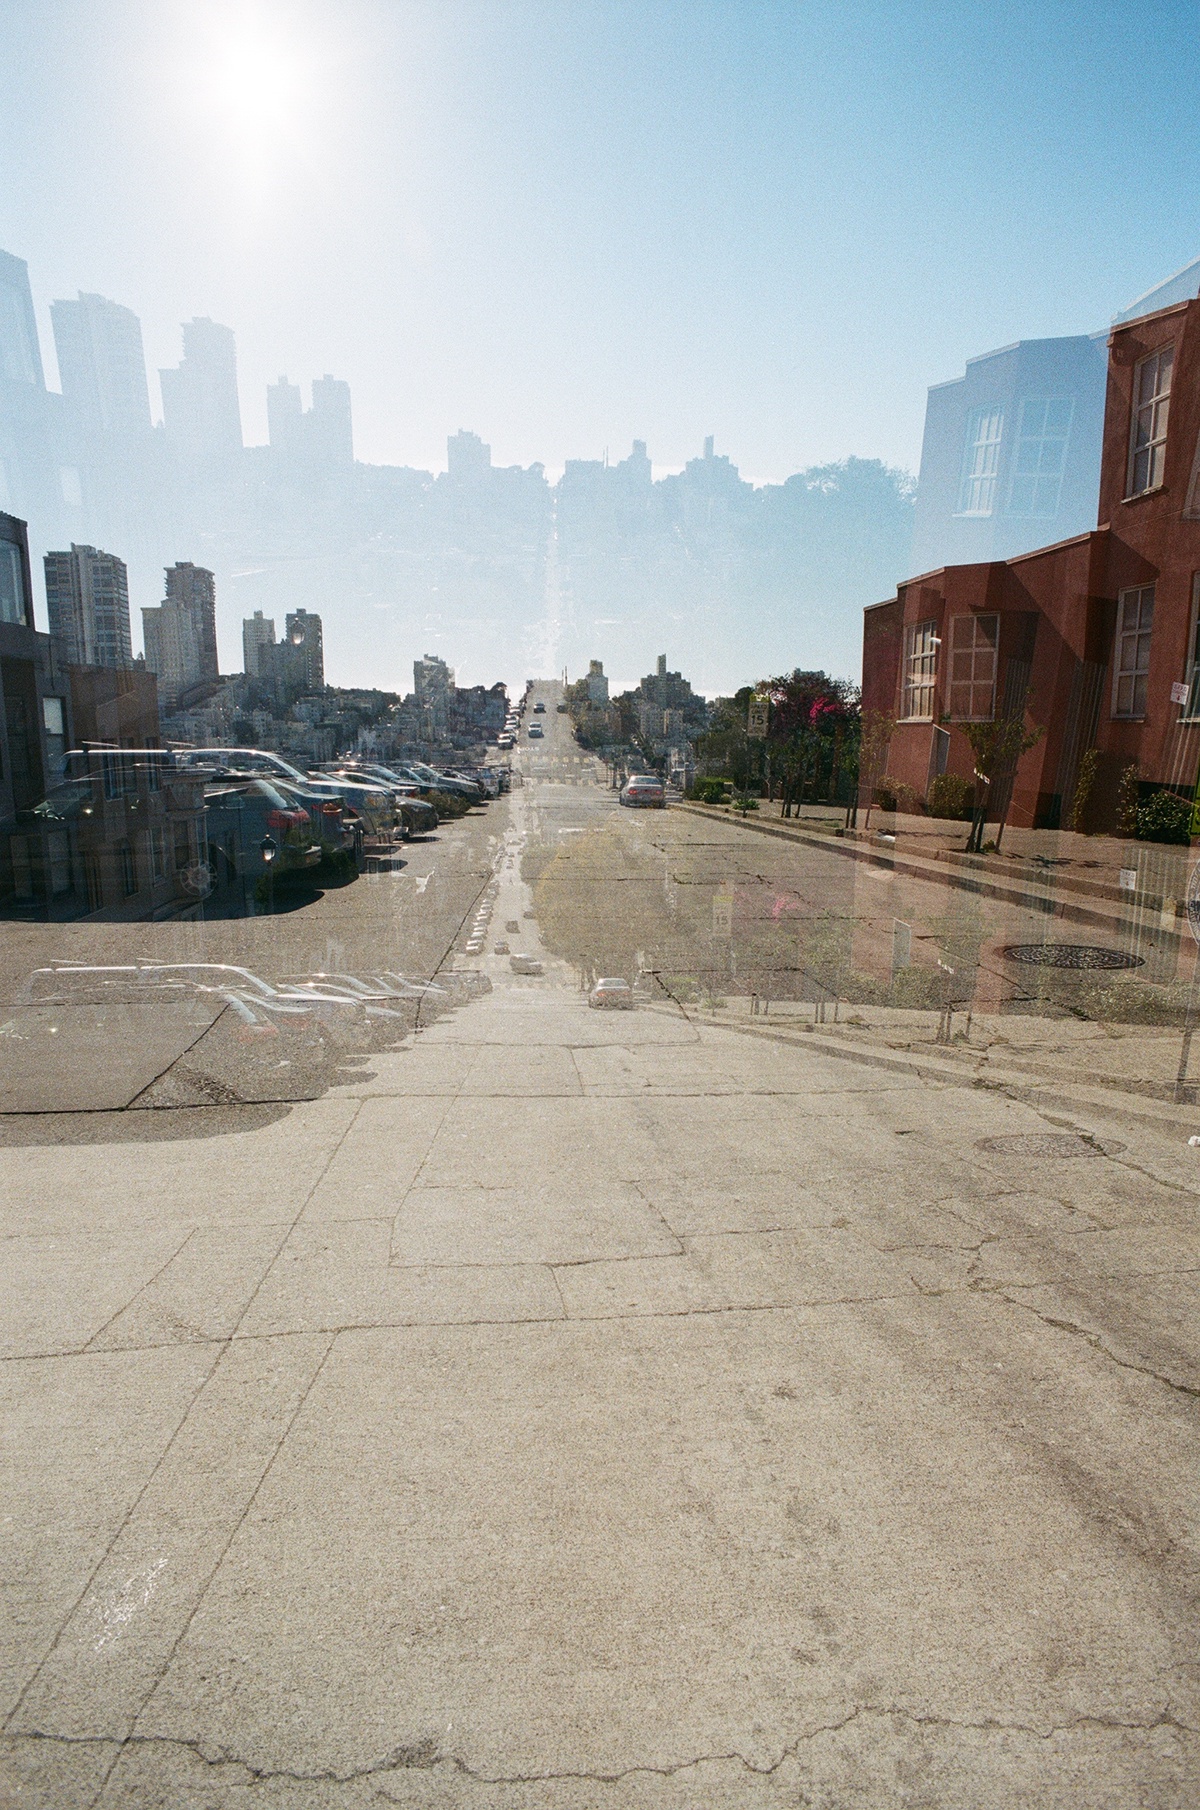 Melancholy Points of View revisited places Analogue SHIFT double exposure angle Memory